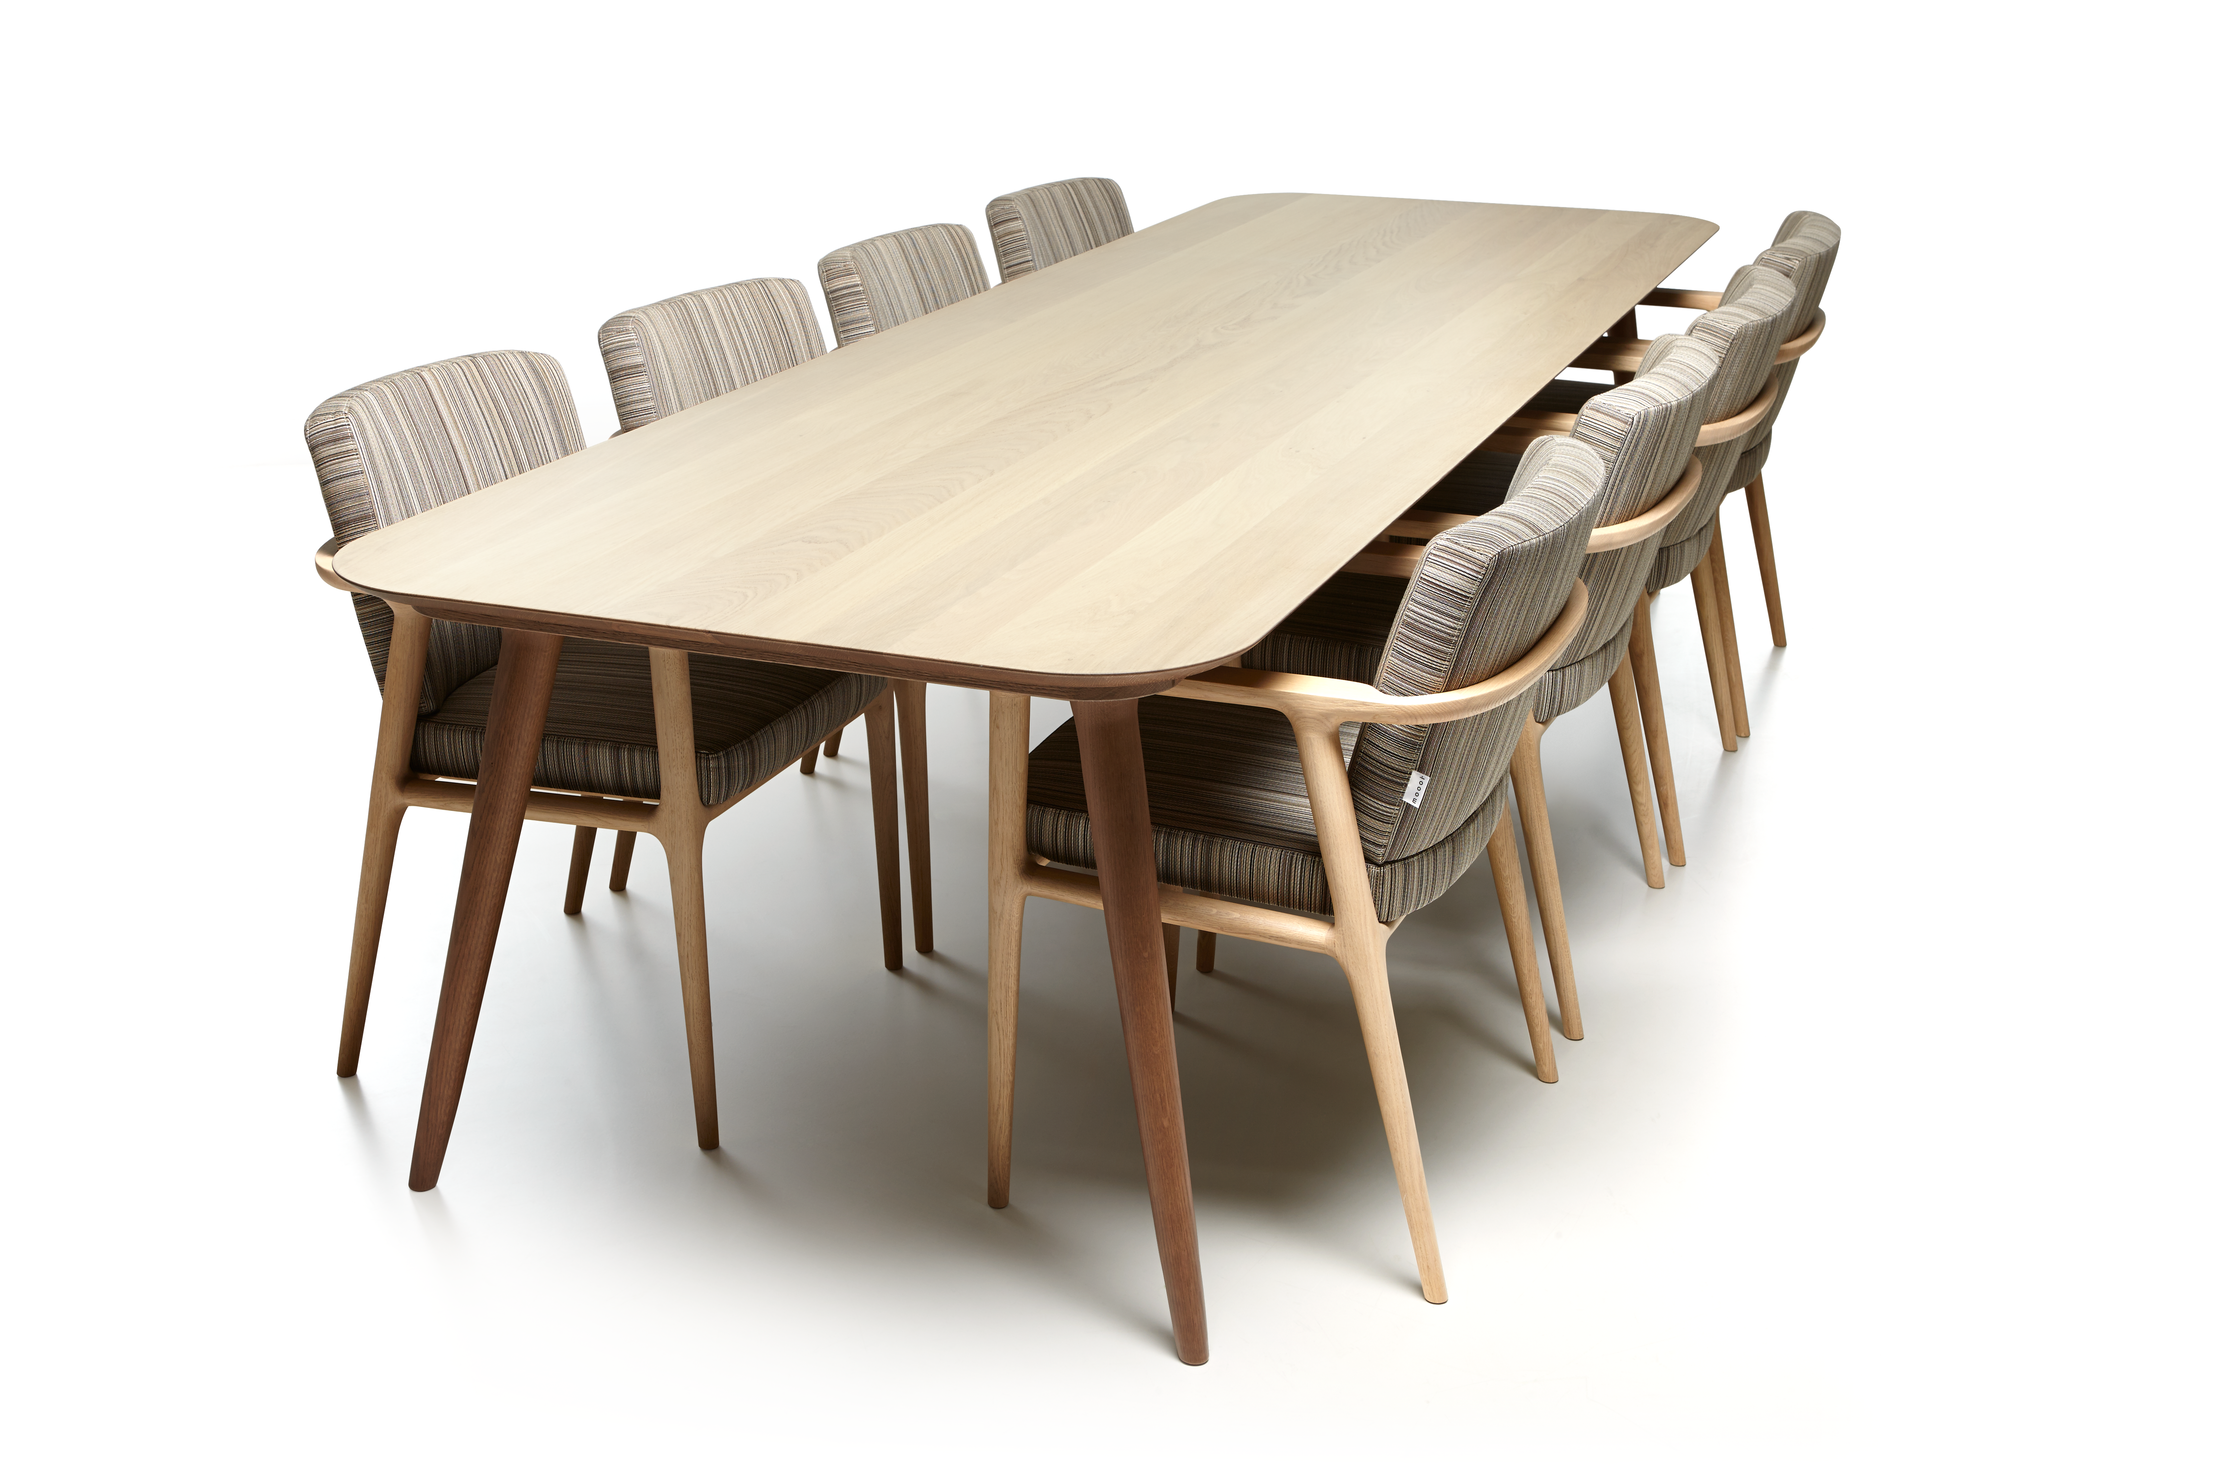 Zio Dining Table with Zio Dining Chairs Manga